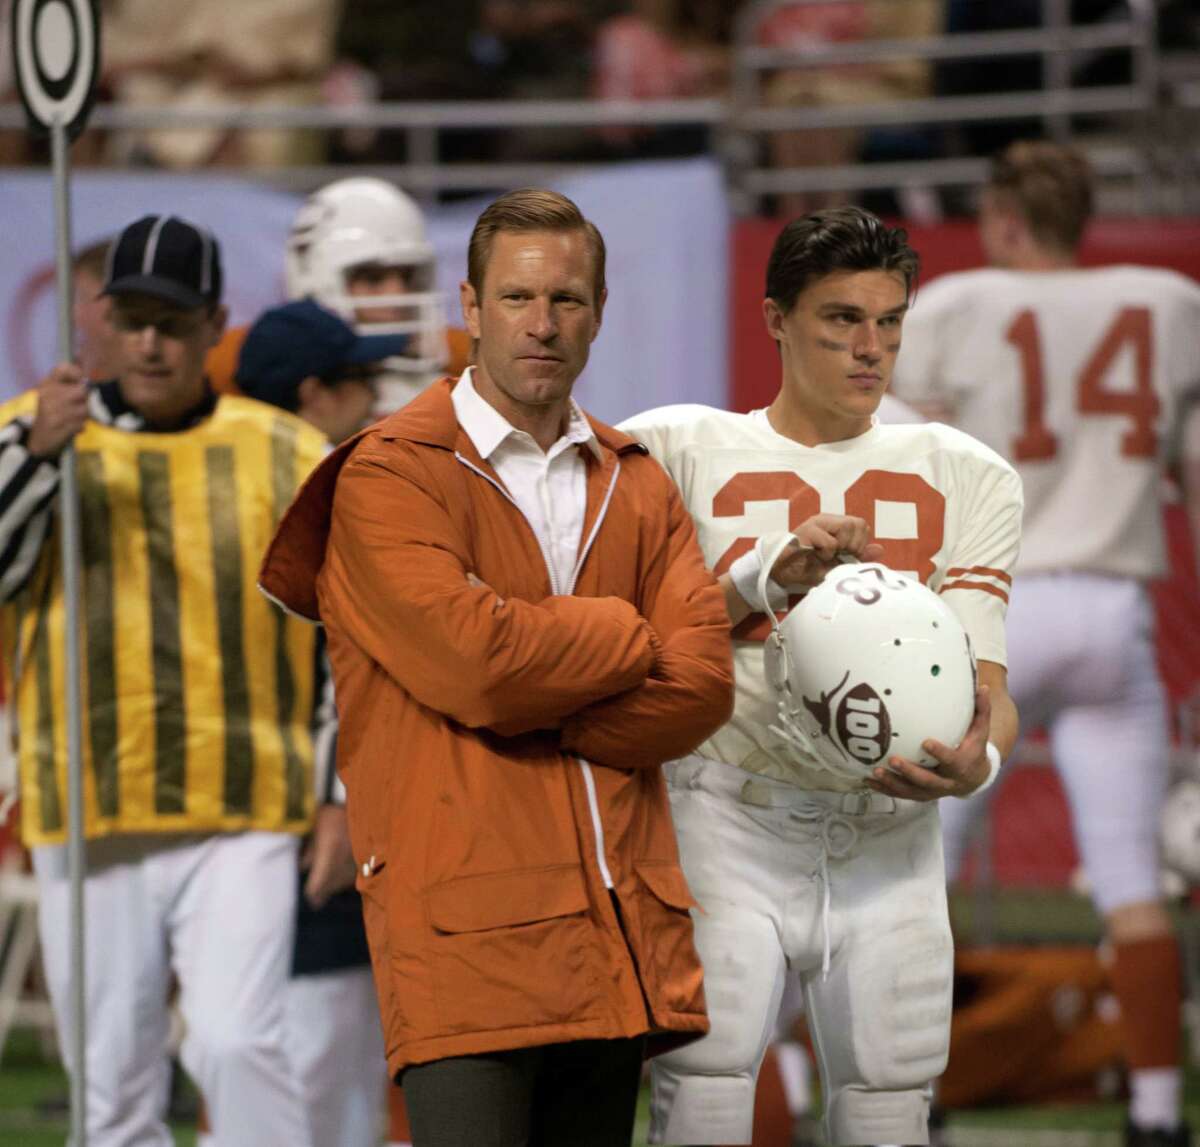 University of Texas coach Darrell Royal (Aaron Eckhart) and star safety Freddie Steinmark (Finn Wittrock, right) observe from the sidelines in "My All-American."